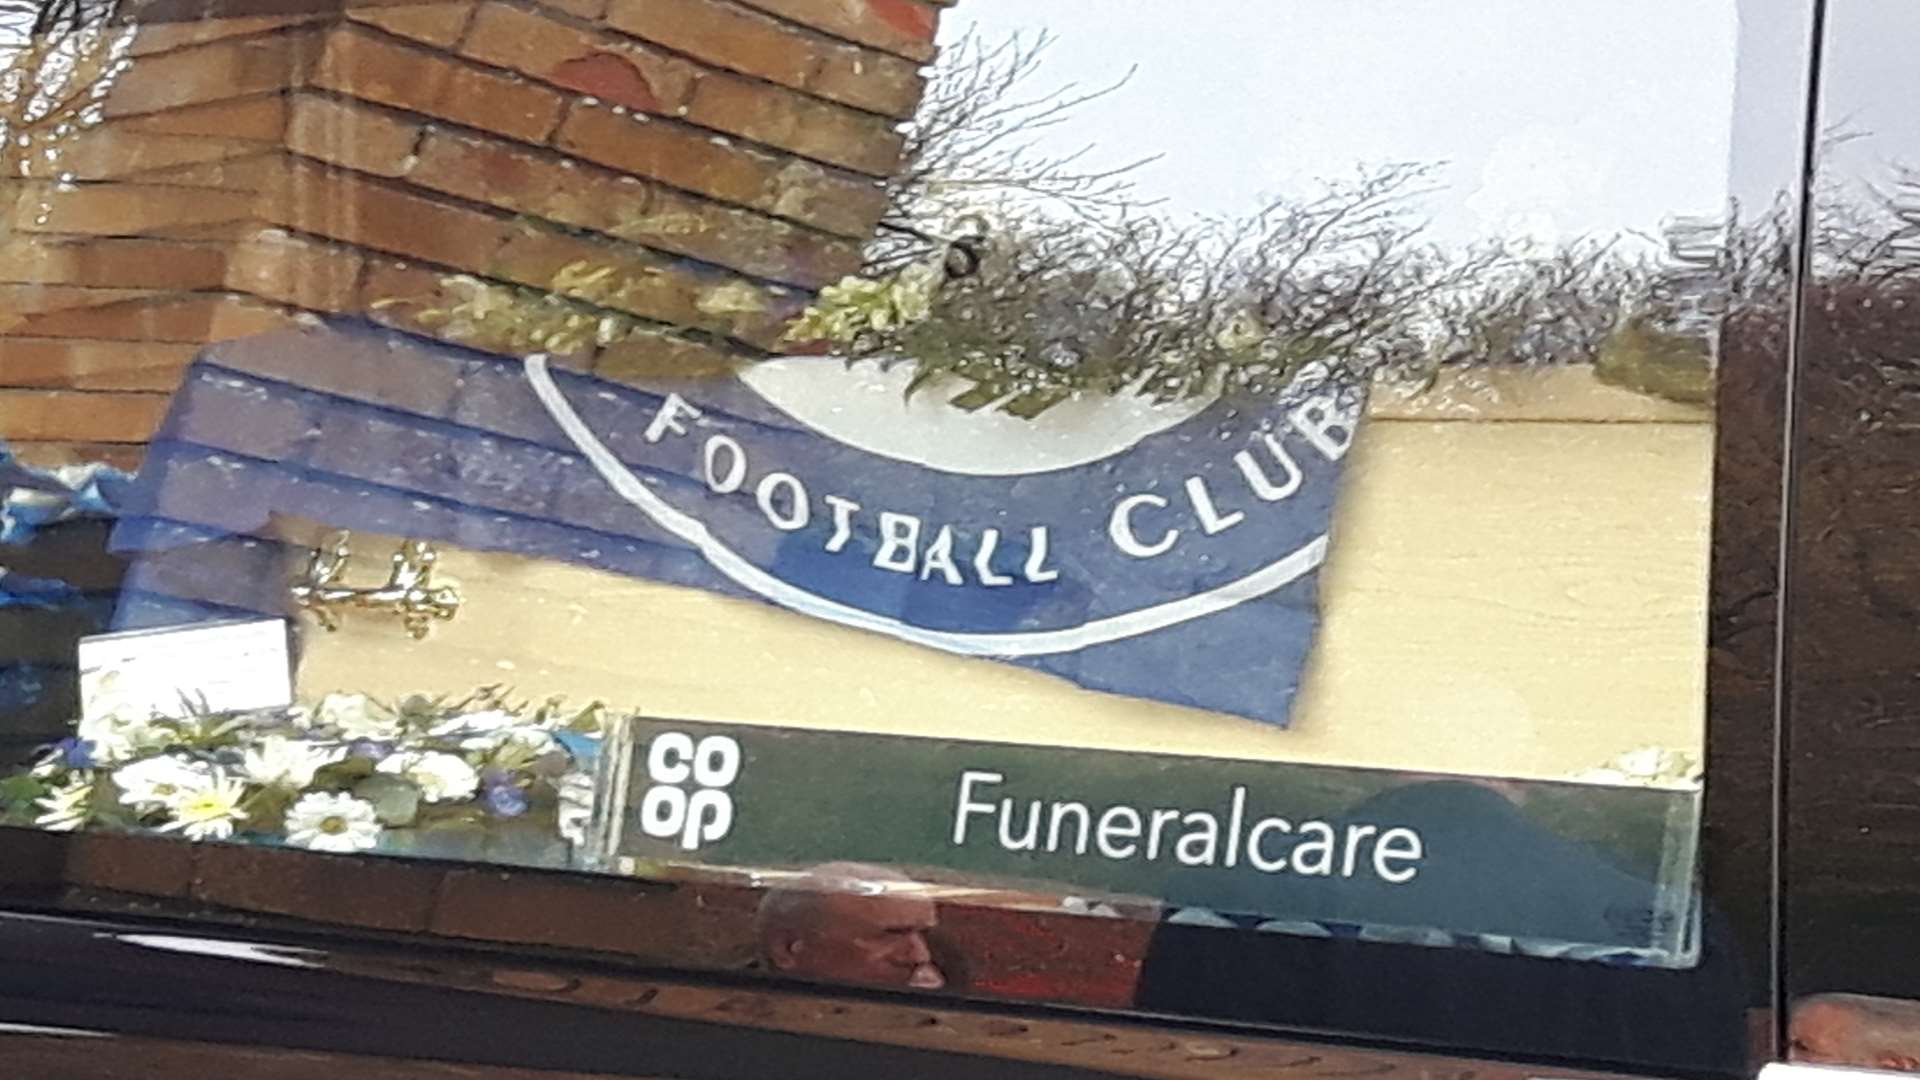 Del's coffin was draped in a Chelsea flag